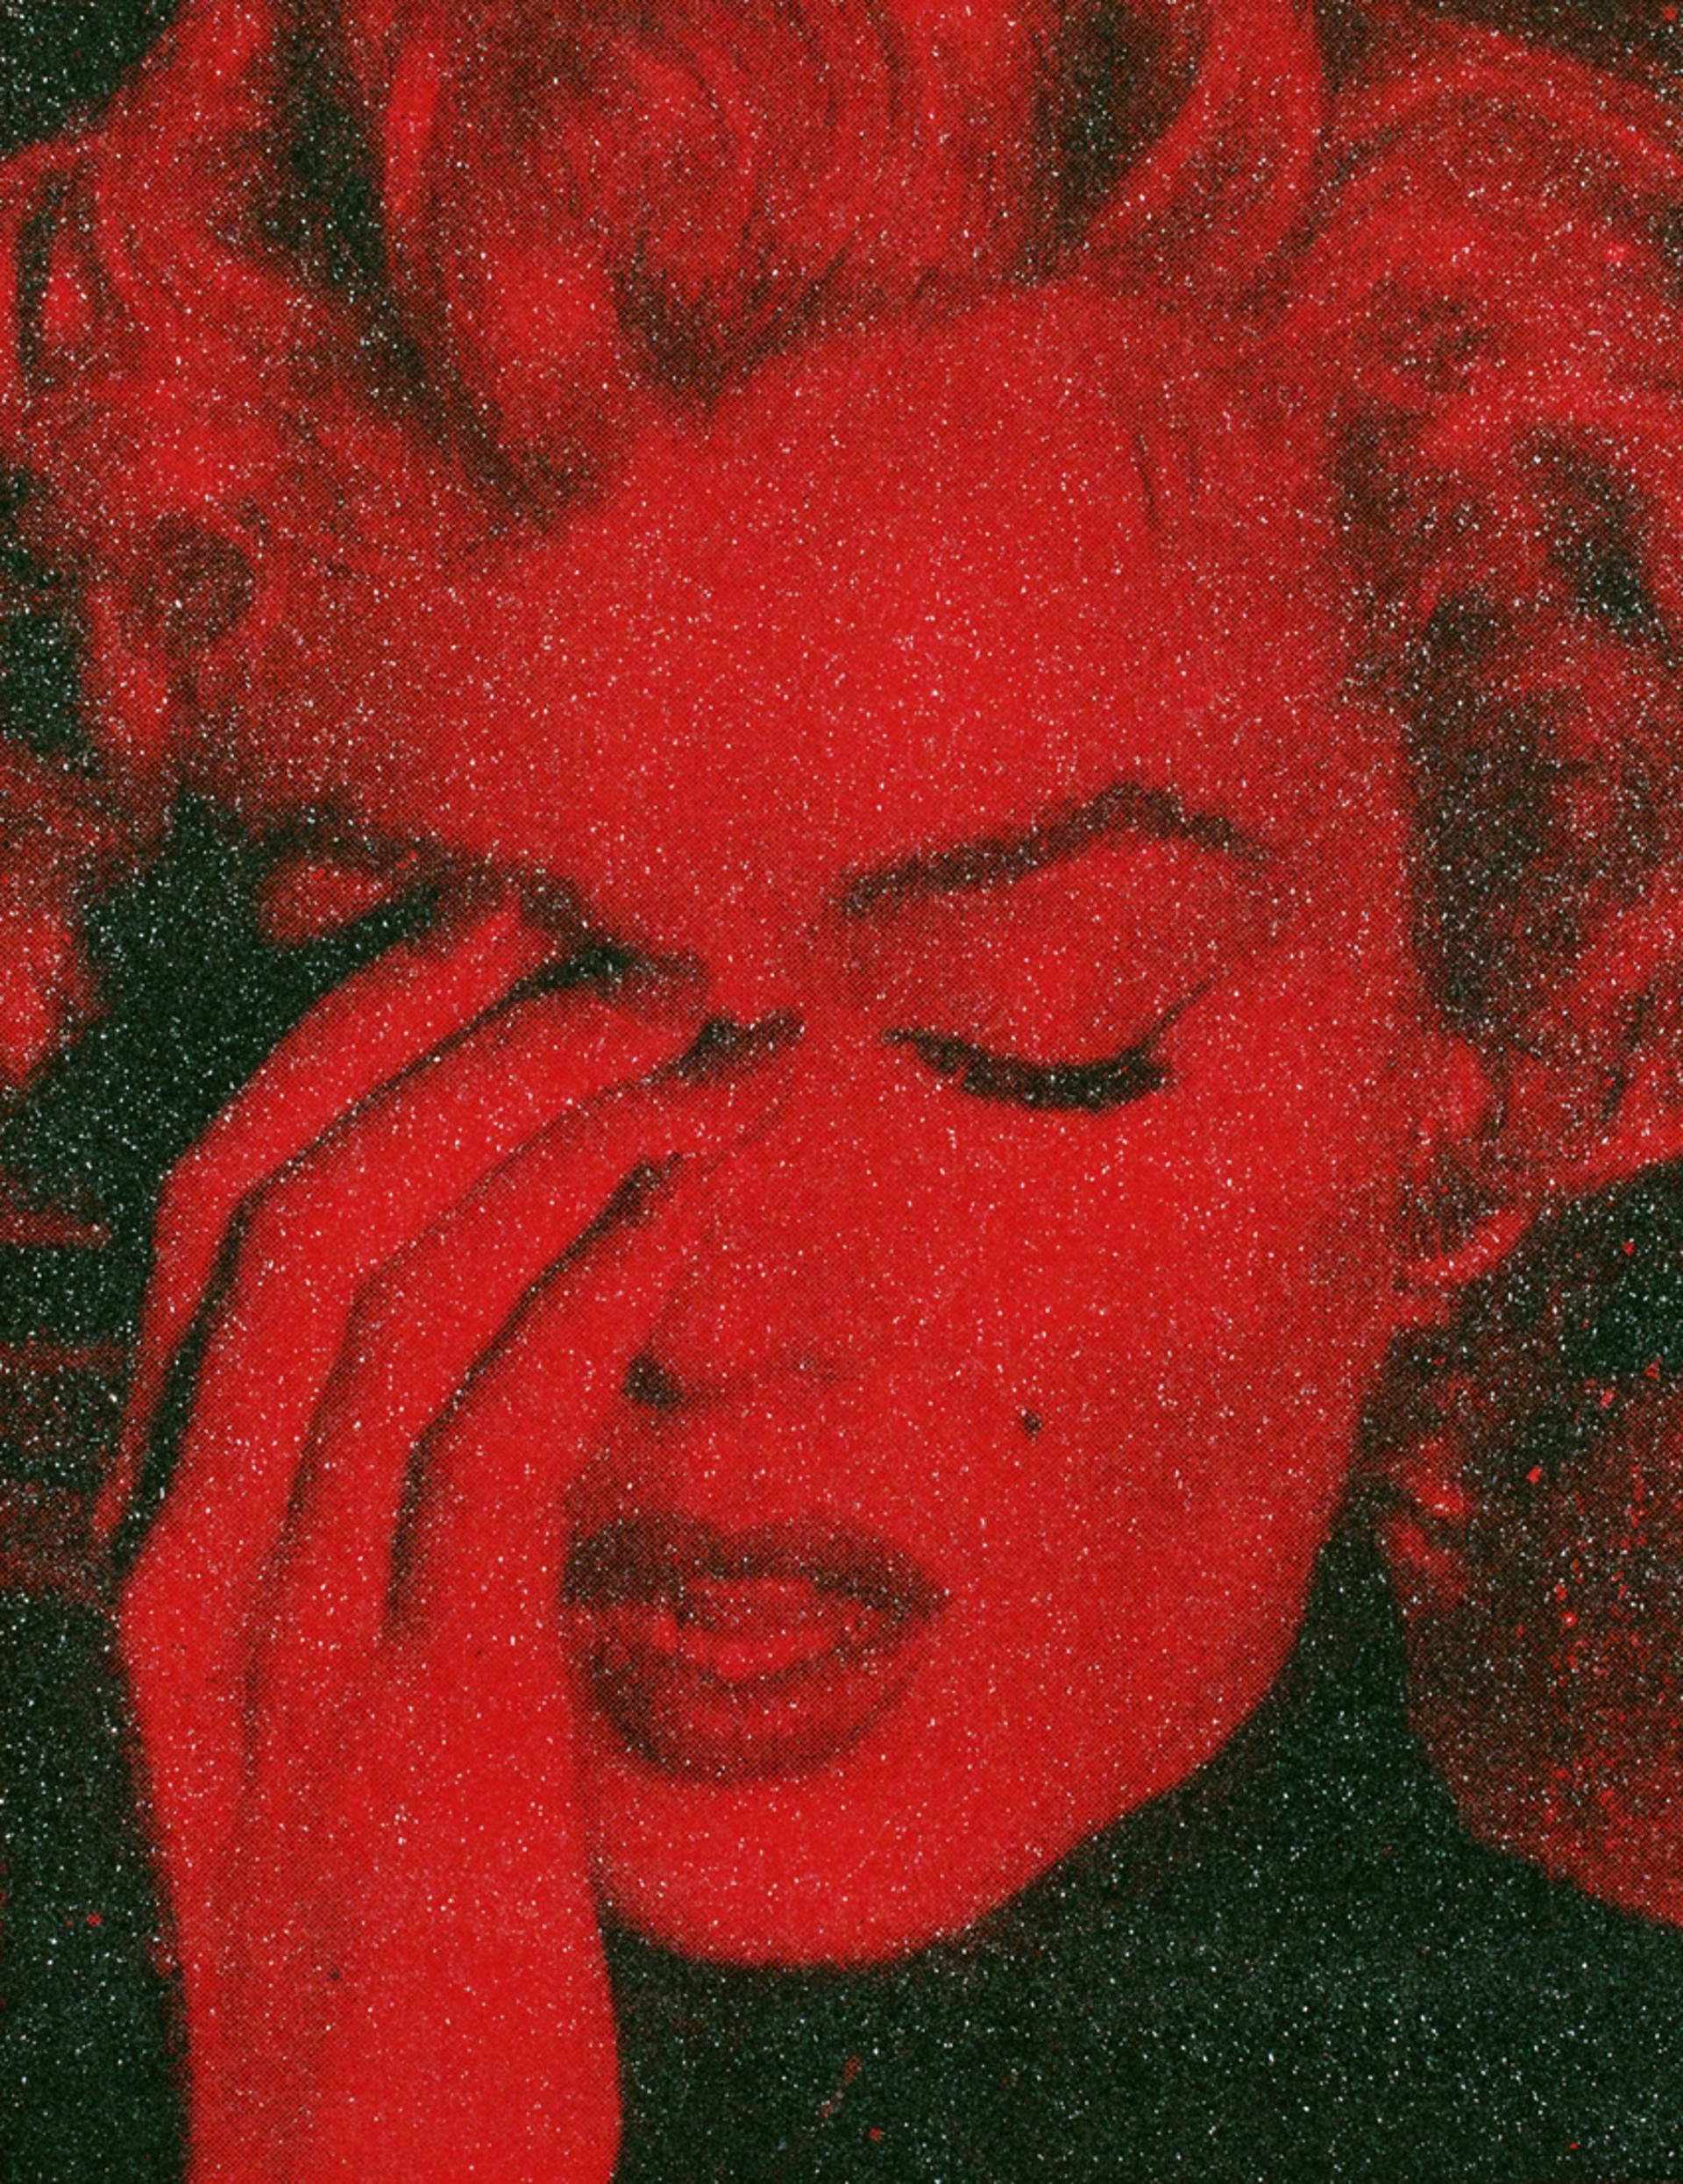 MARILYN CRYING CALIFORNIA - Blind Red-Edition 3/4 by Russell Young